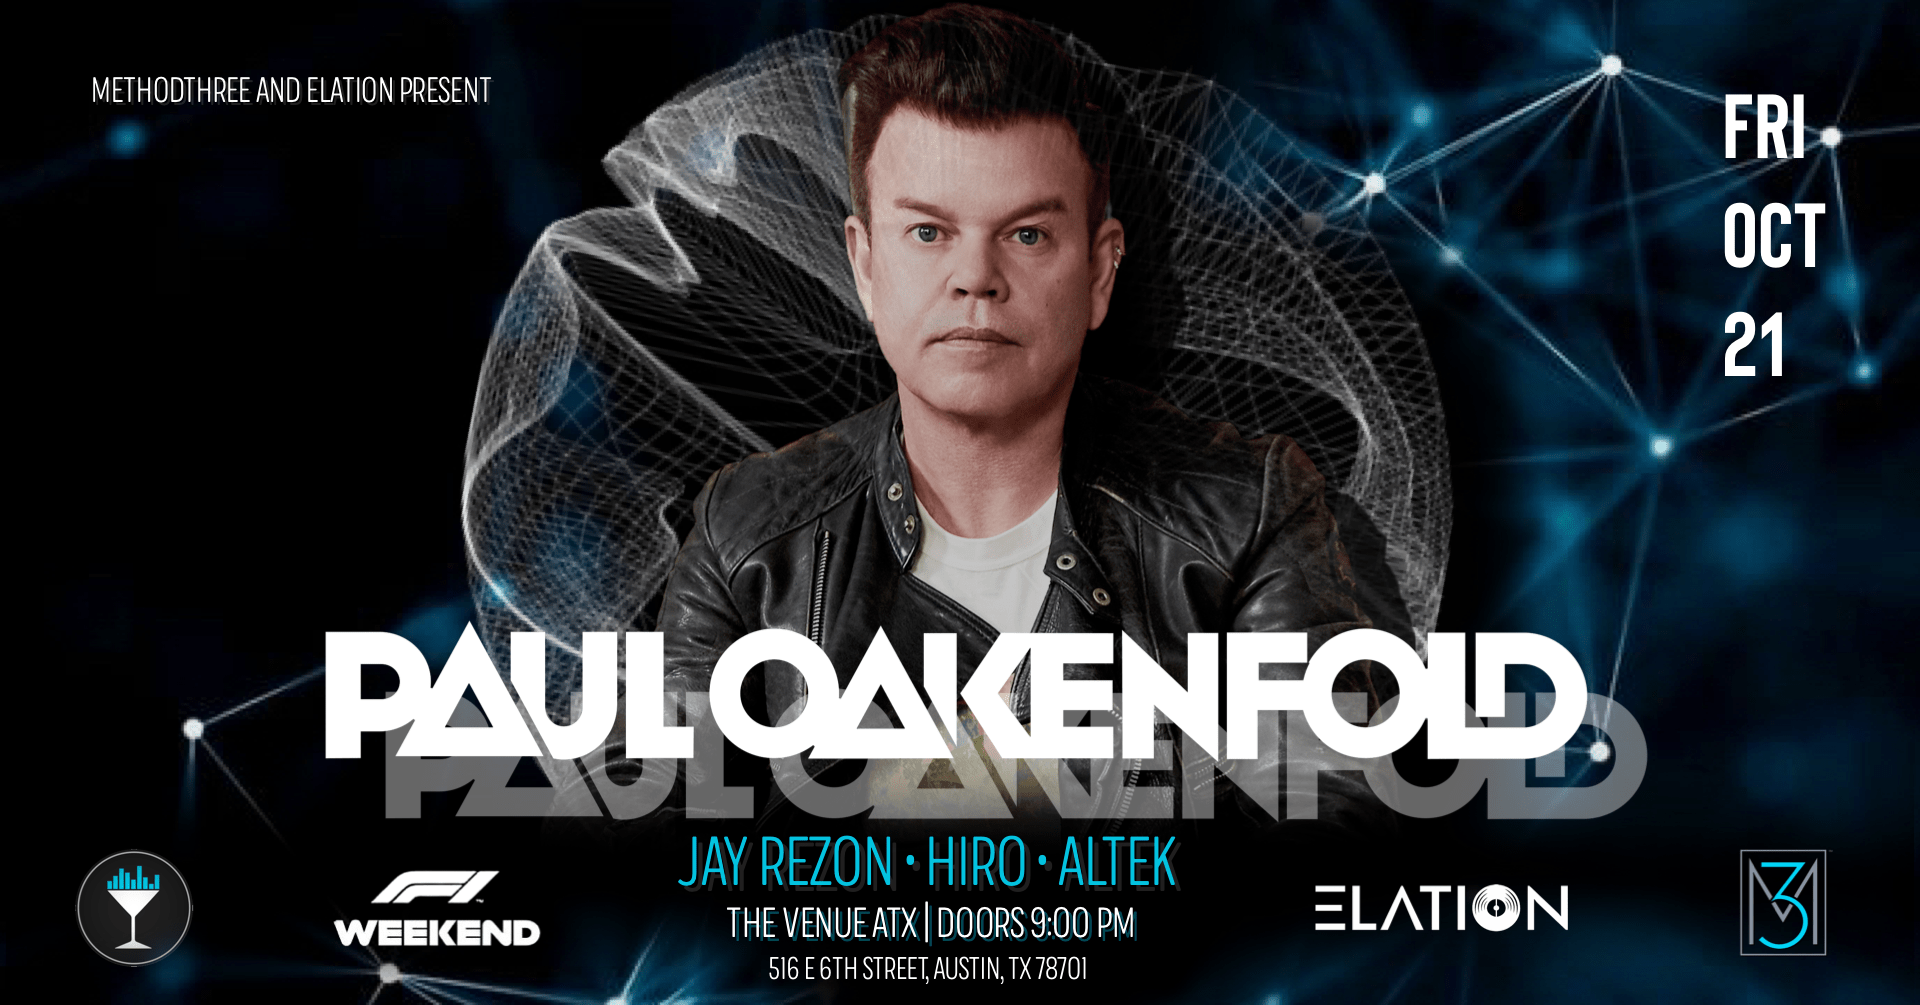 Paul Oakenfold Tickets at The Venue ATX in Austin by THE VENUE ATX Tixr